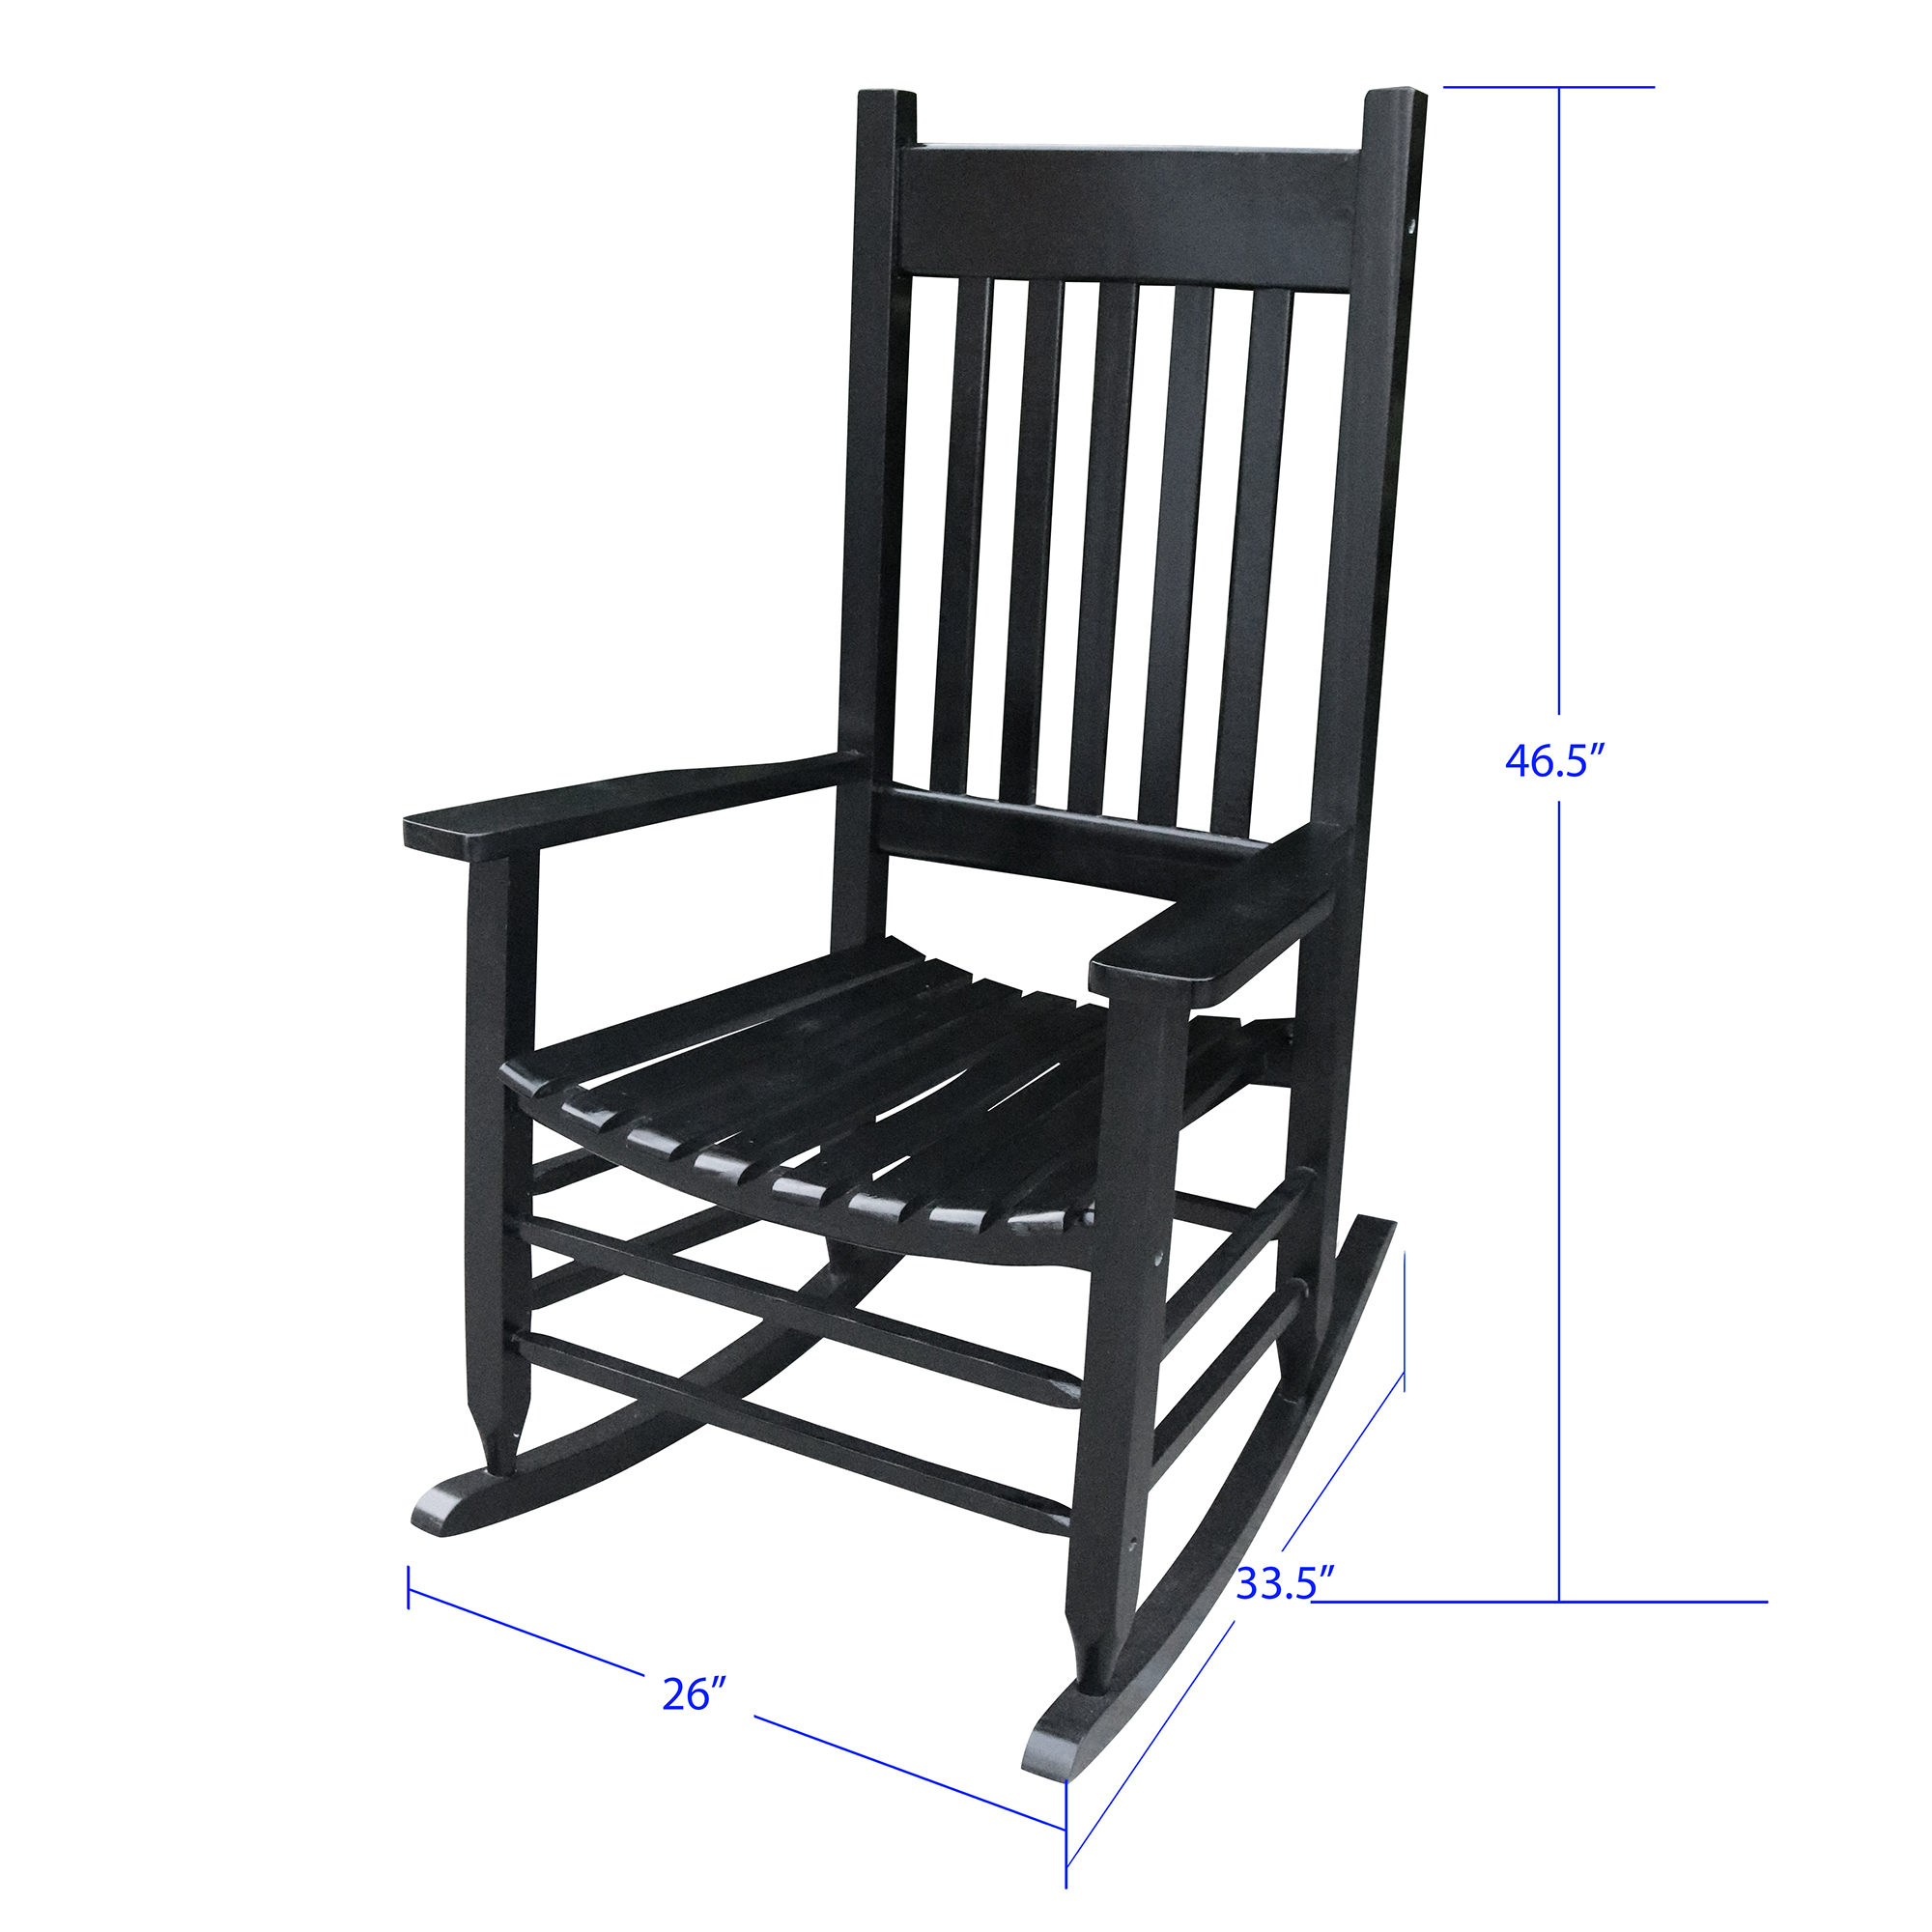 Nine Bull Wooden Porch Rocker Chair, Rocking Lounge Chair for Patio Balcony Yard, Black - image 3 of 5